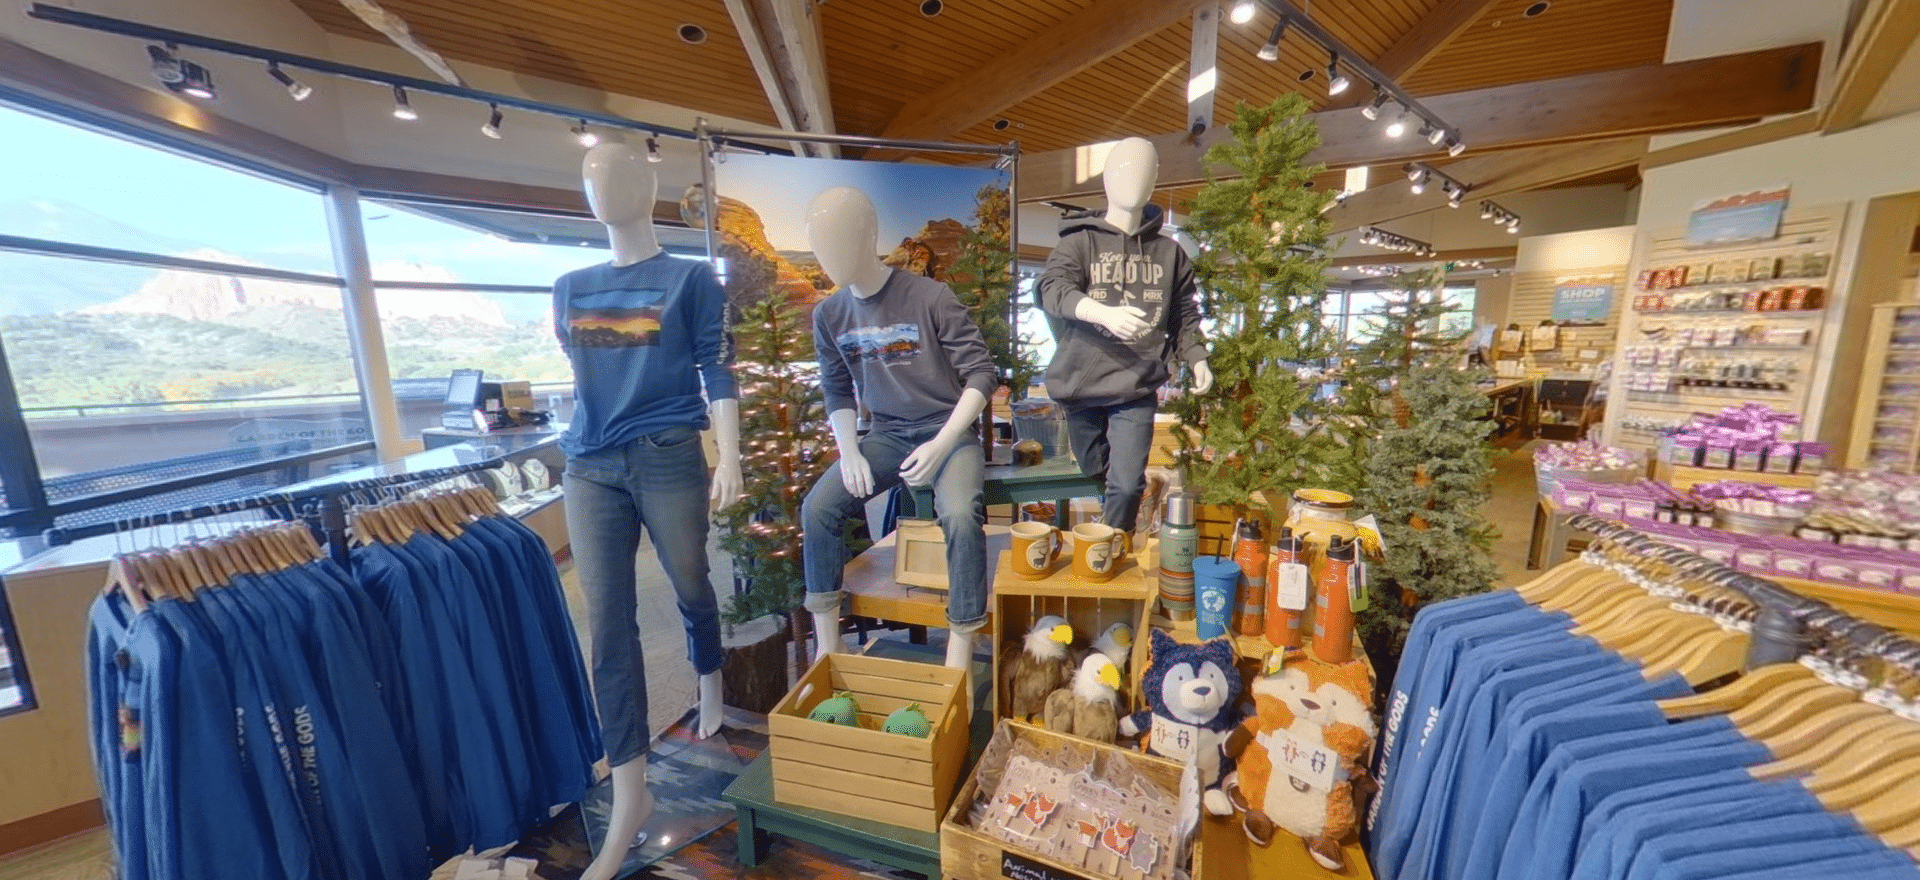 Inside view of gift shop